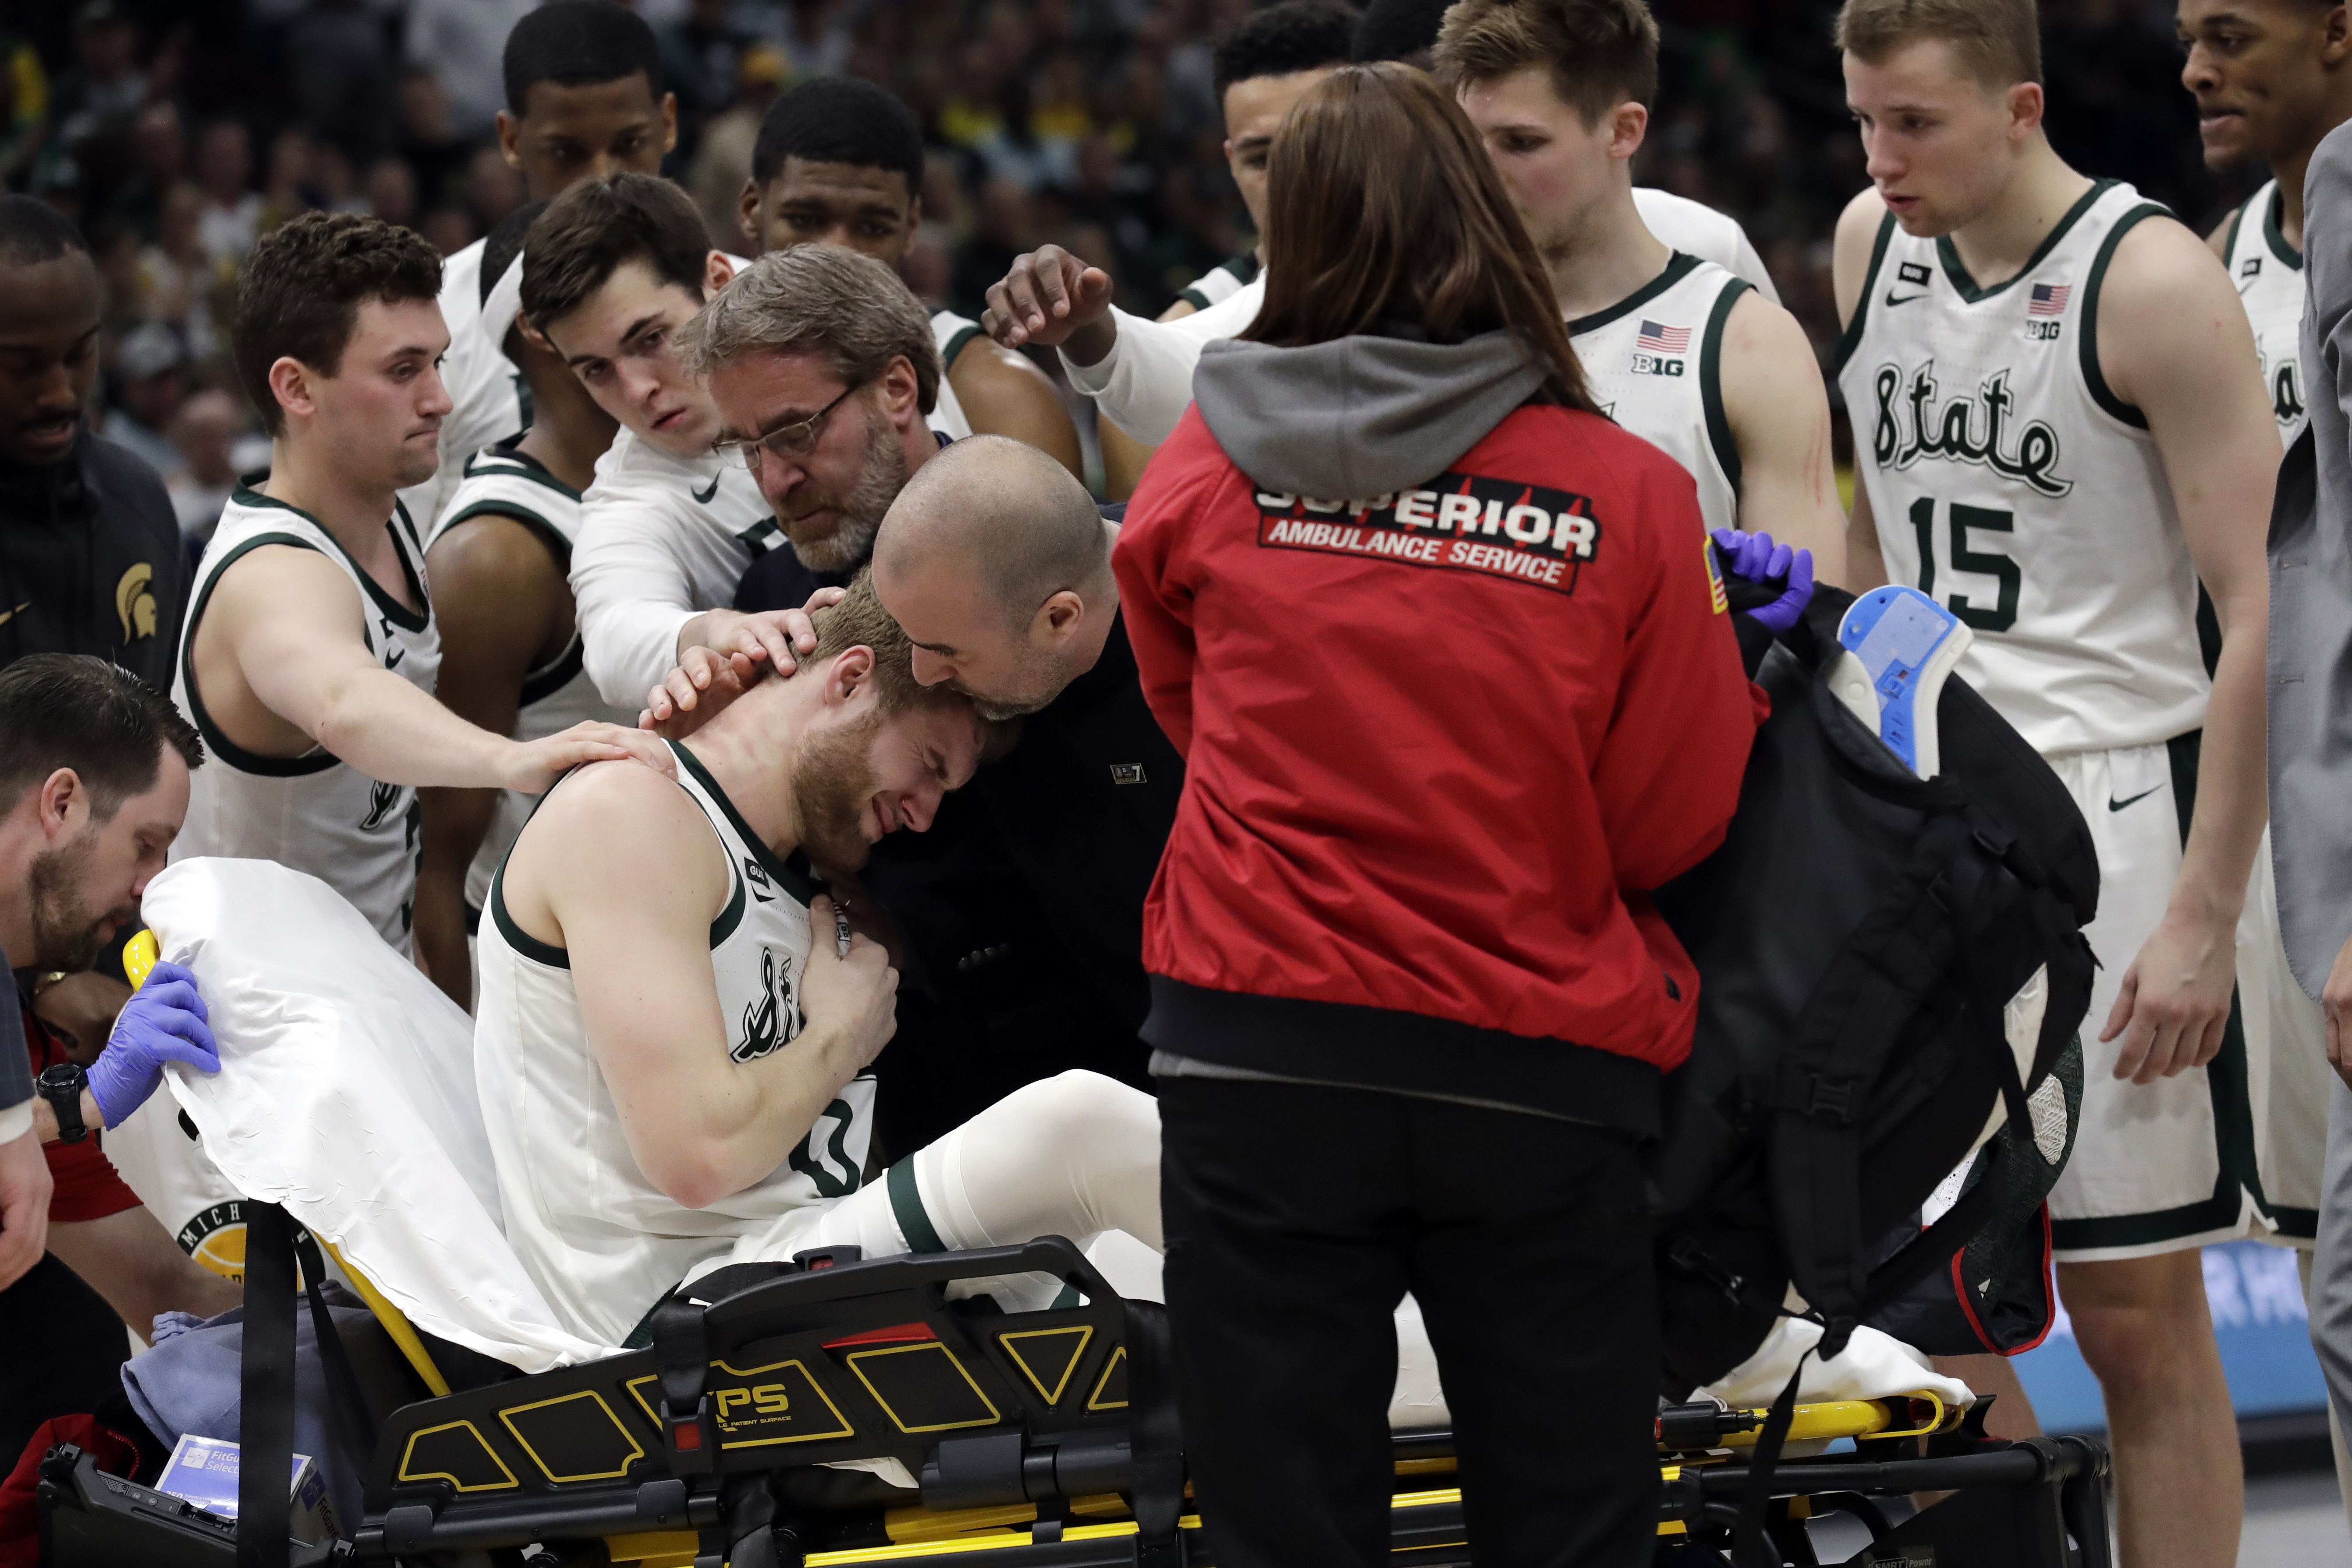 Michigan State’s Ahrens taken from court with leg injury